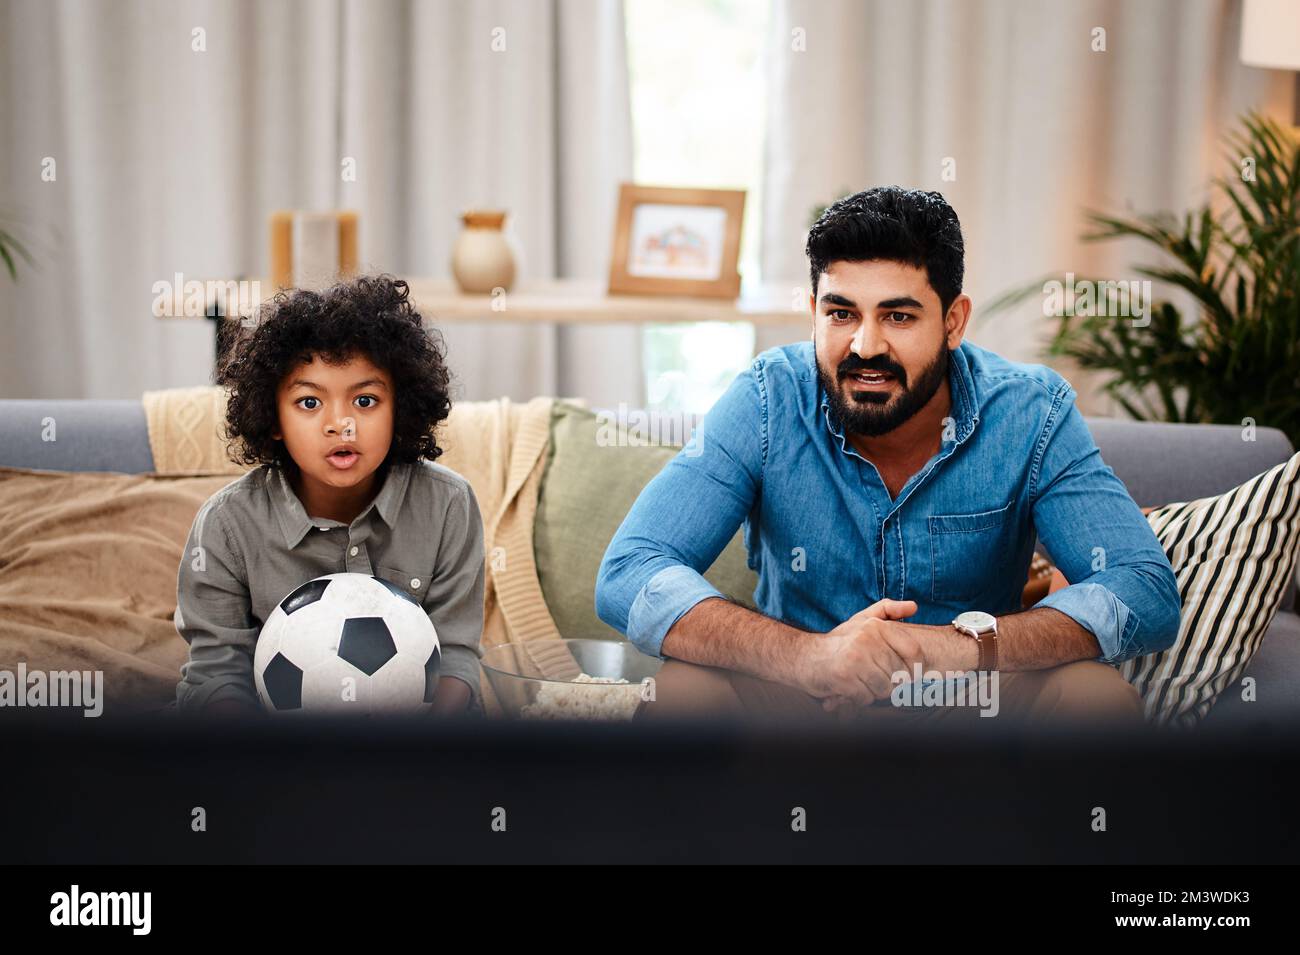 The match is starting liven up now. an adorable little boy watching a football game with his father on tv at home. Stock Photo